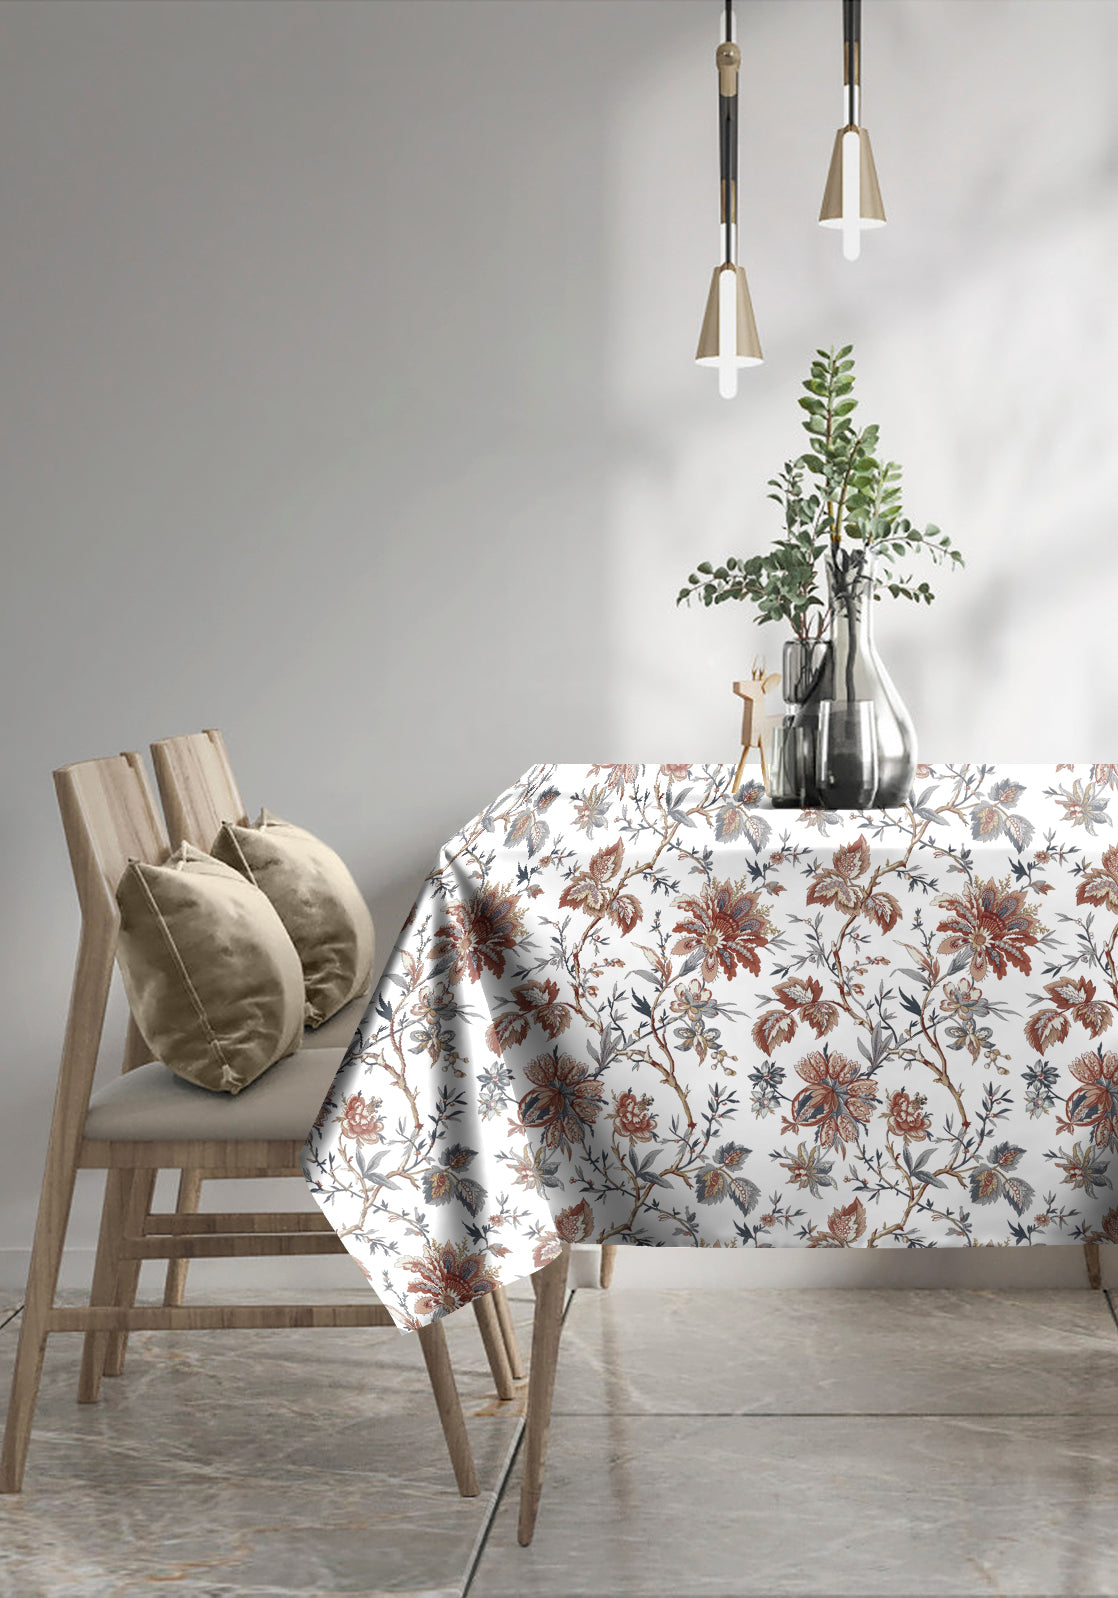 Andaman White 6 Seater Table Cloth